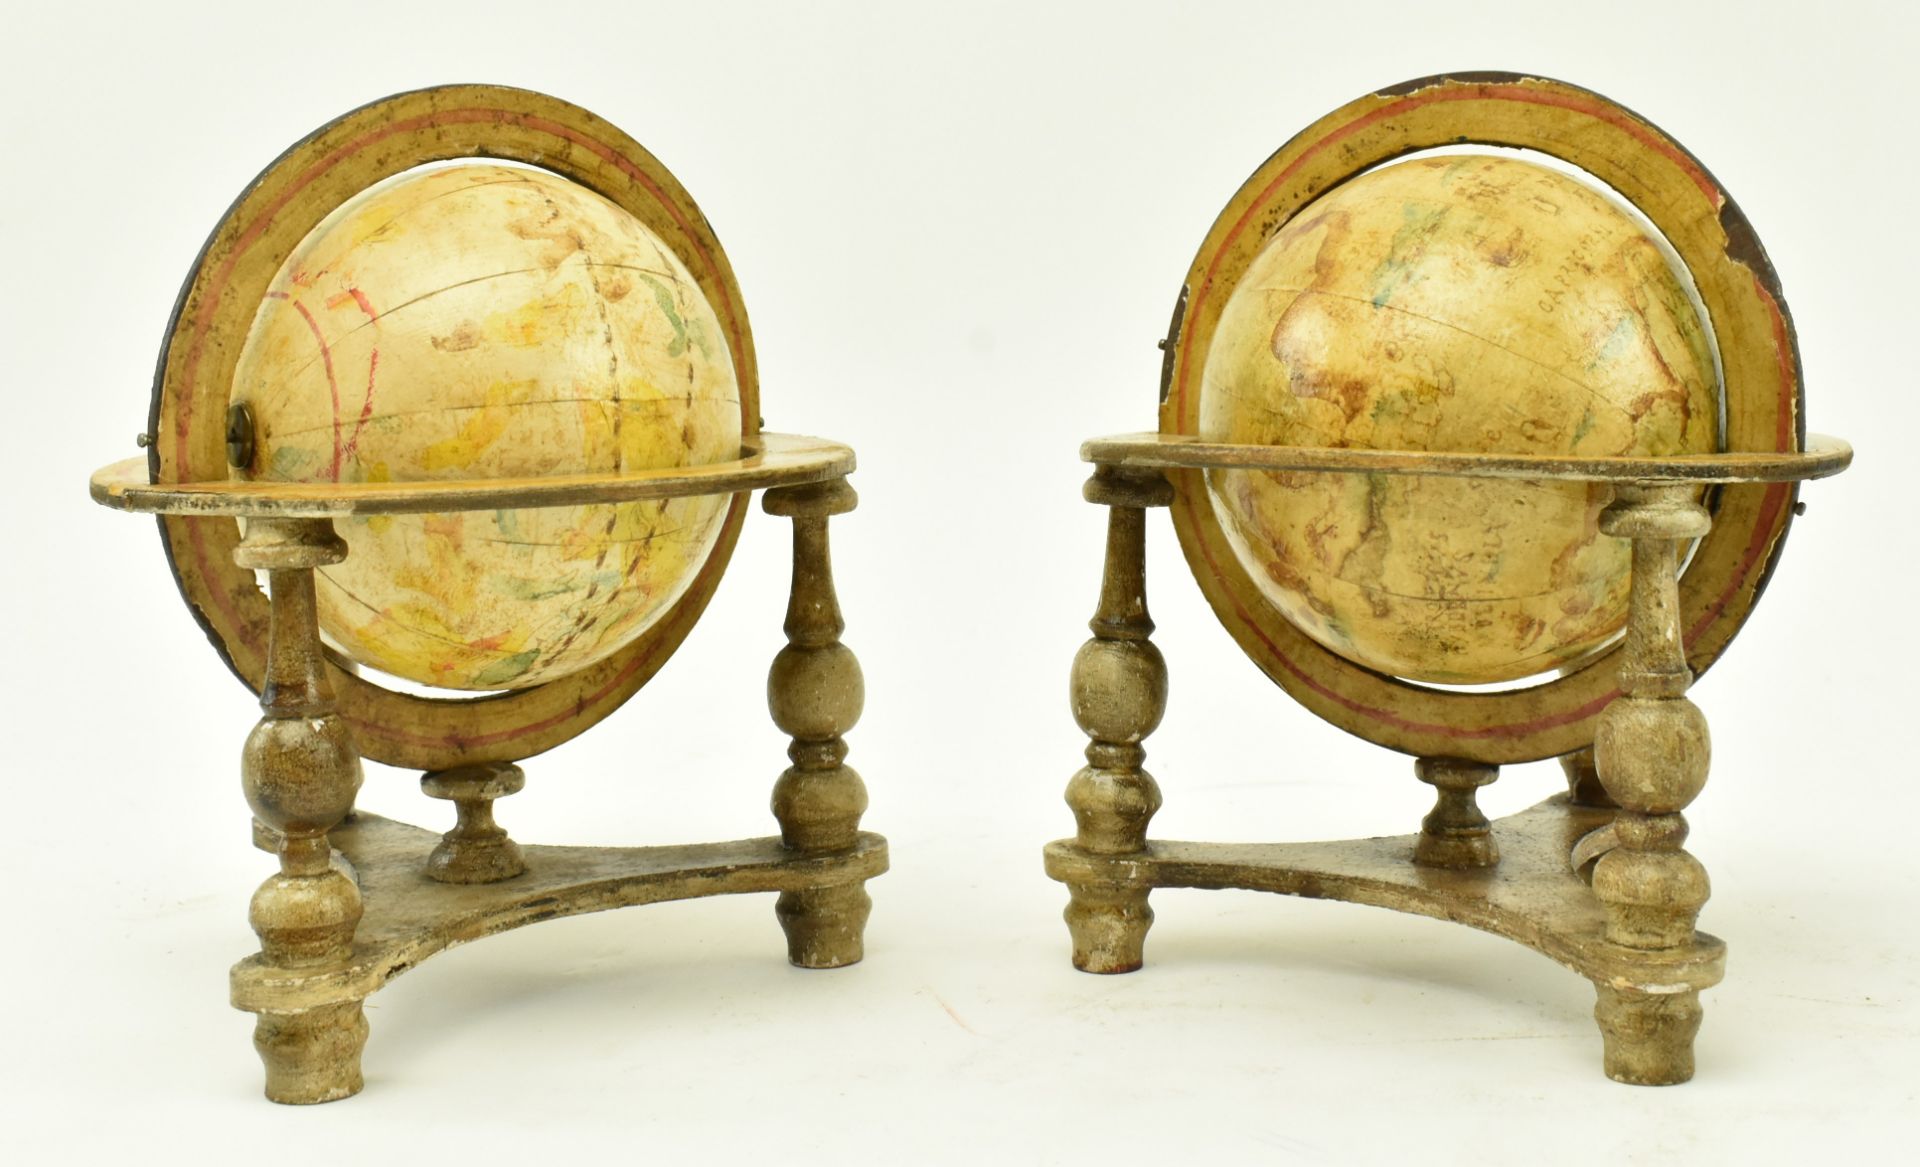 PAIR OF EARLY 20TH CENTURY METAL & WOOD CELESTIAL GLOBES - Image 5 of 6